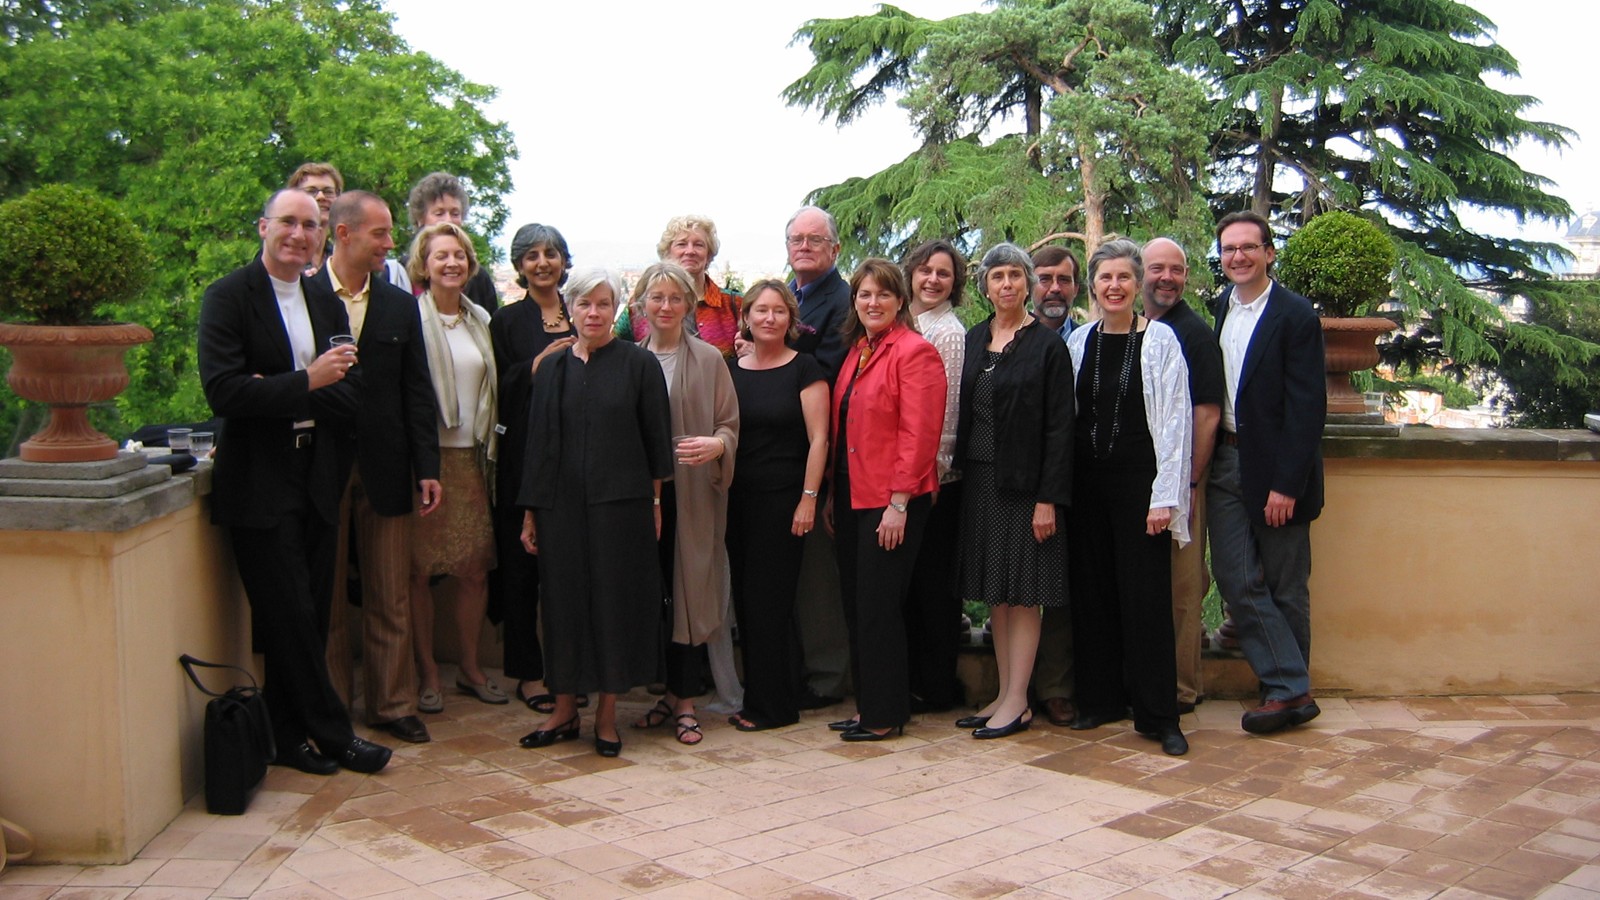 Sally Boasberg, fifth from right, with TCLF board members at Villa Aurelia at the American Academy in Rome in 2004